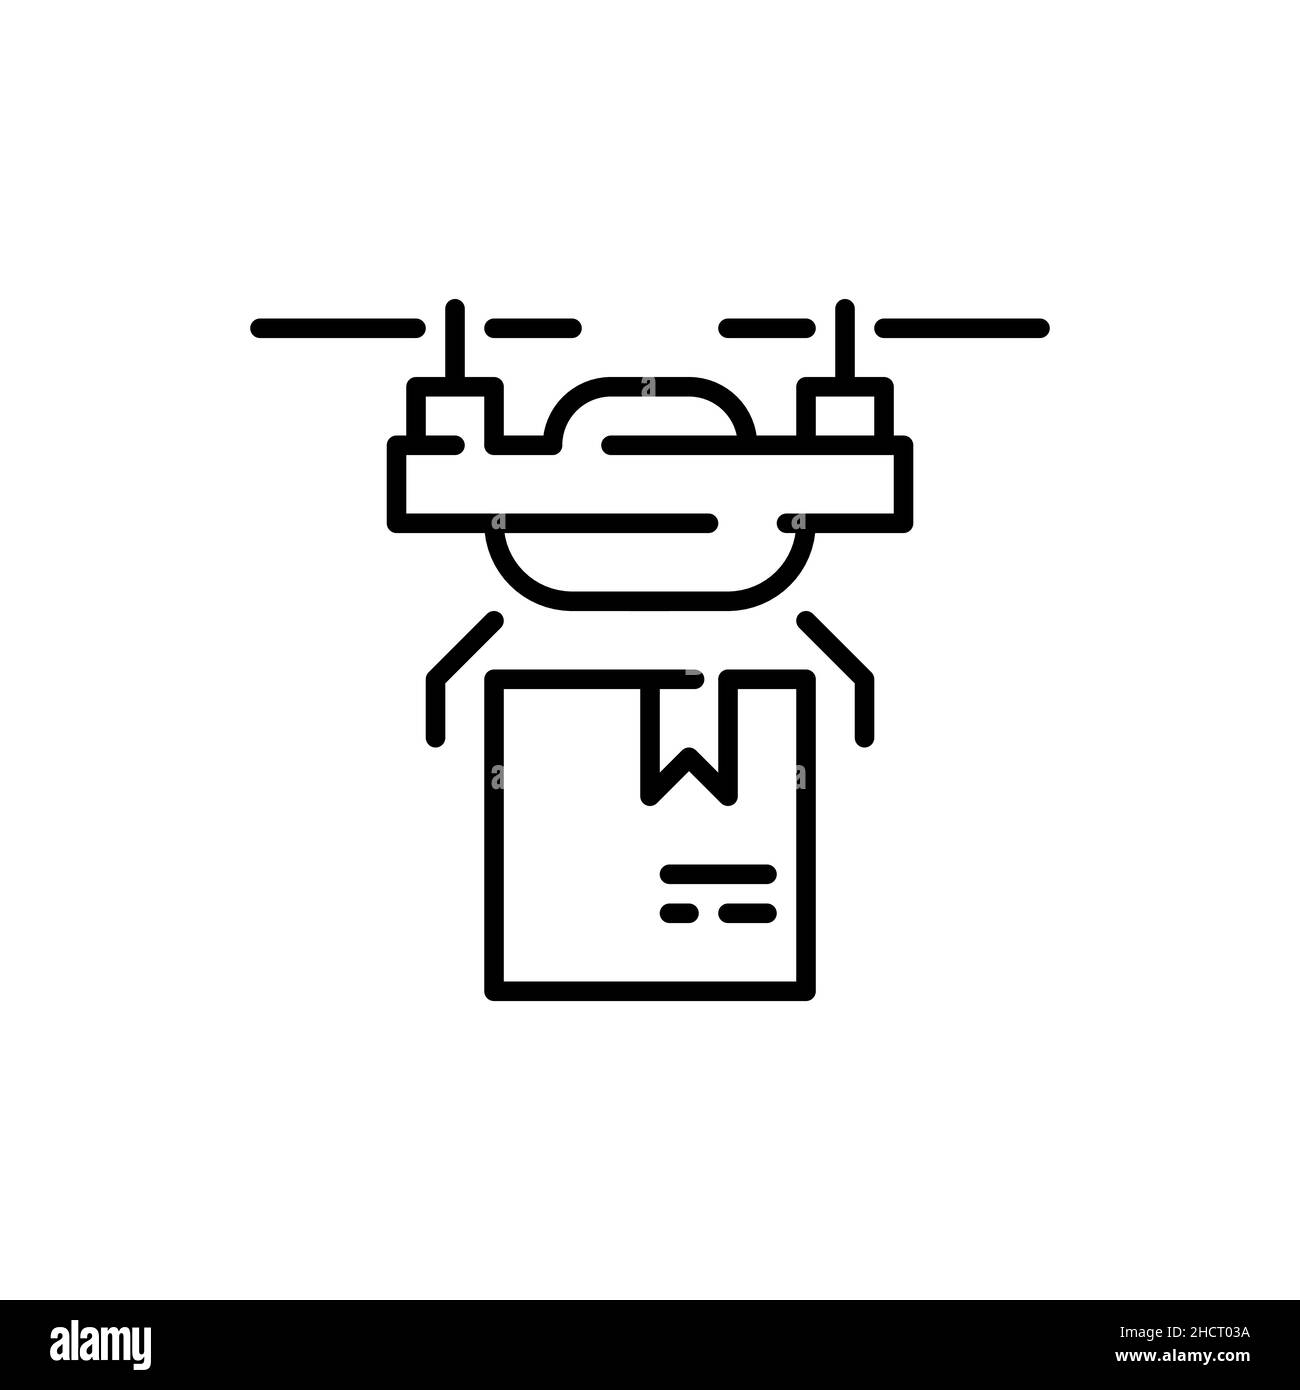 Drone delivering a parcel. Unmanned automatic aircraft used for transporting goods. Pixel perfect, editable stroke icon Stock Vector